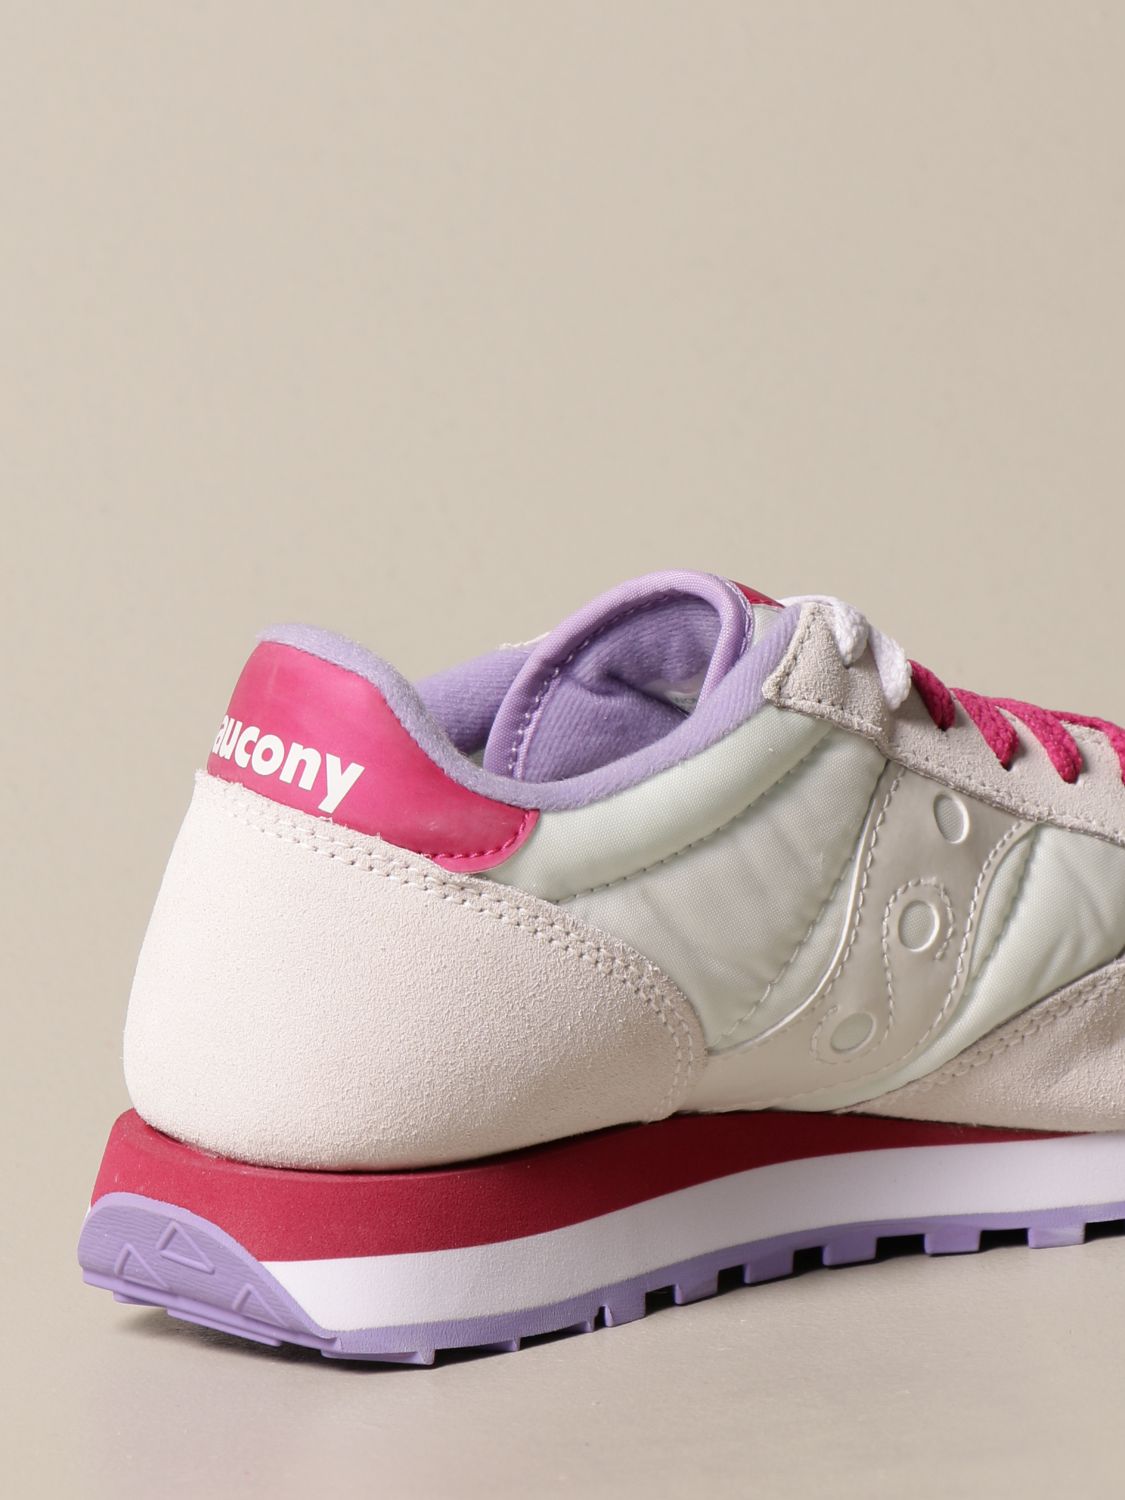 saucony chaussures rose